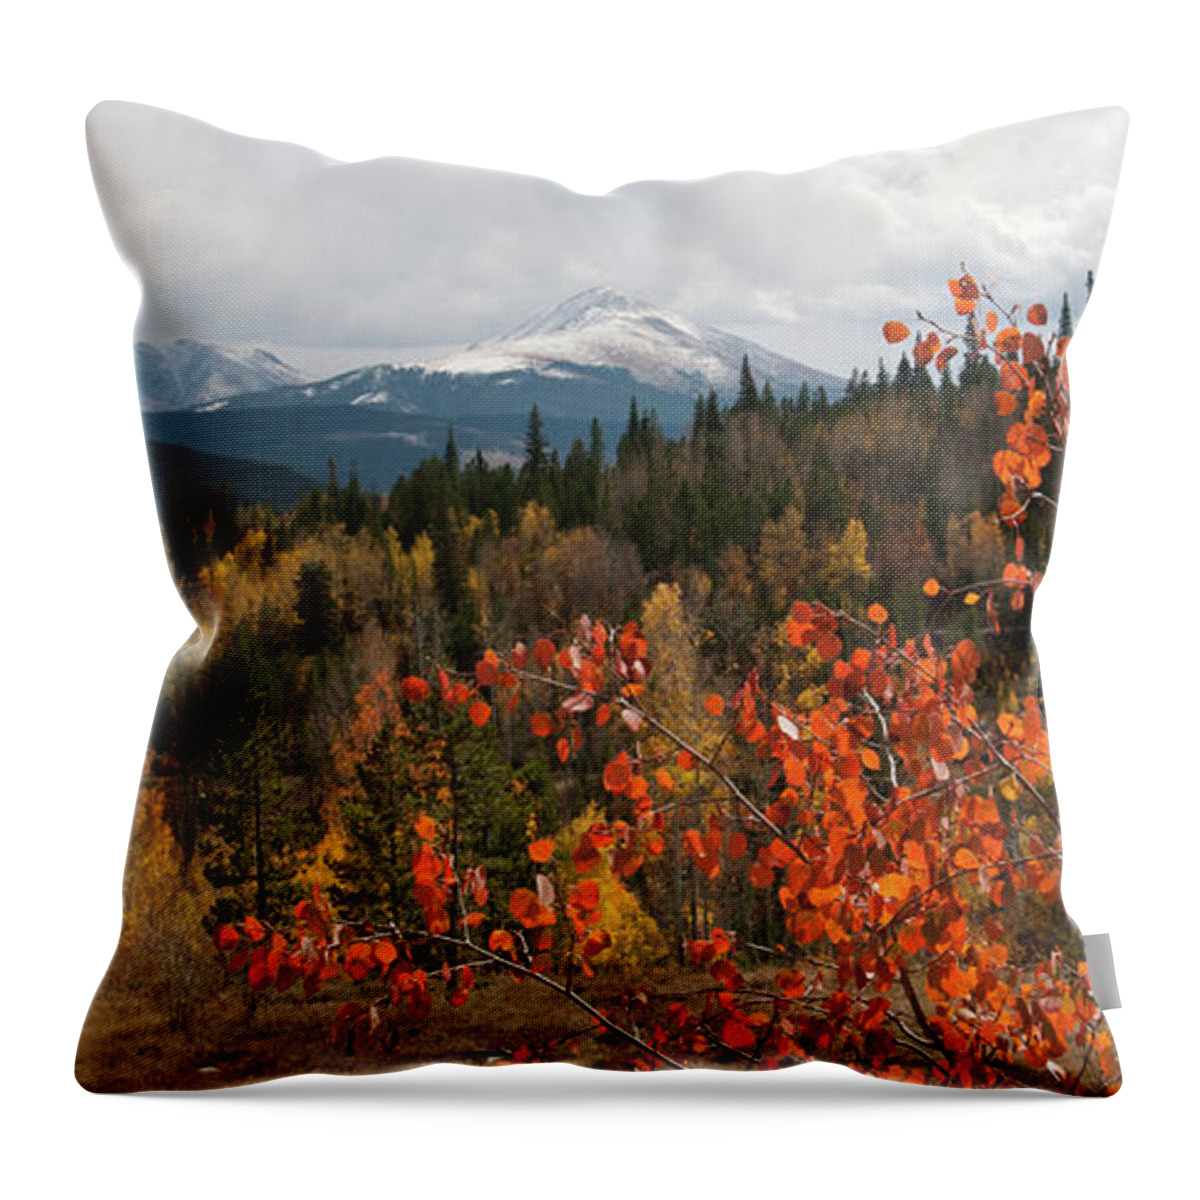 White River National Forest Throw Pillow featuring the photograph White River National Forest Autumn Panorama by Cascade Colors